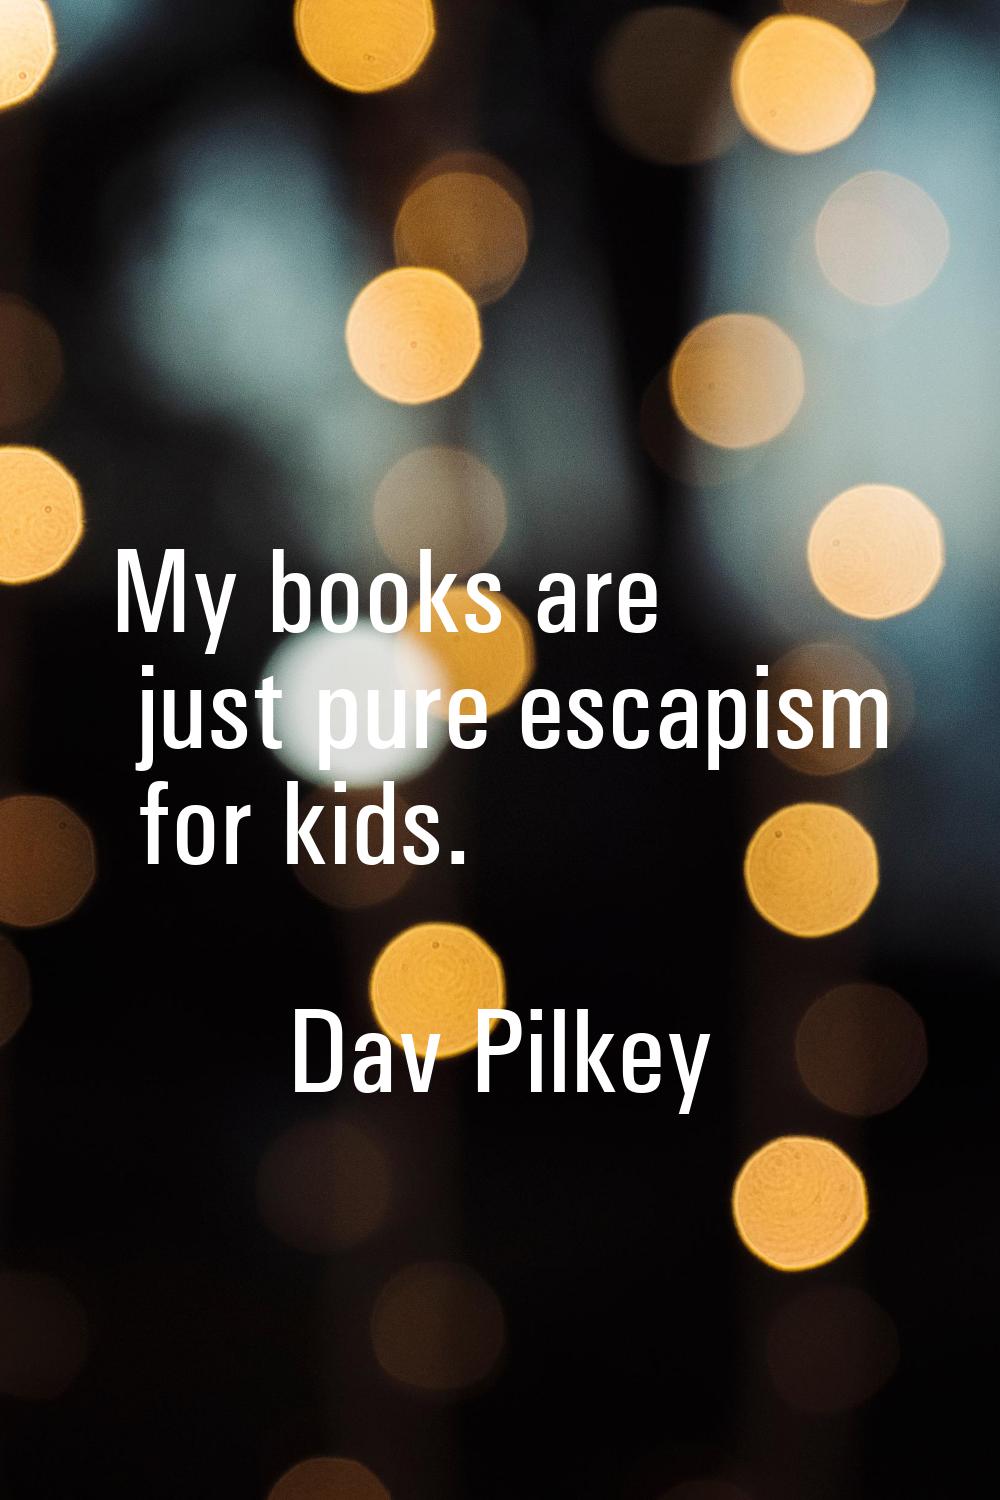 My books are just pure escapism for kids.